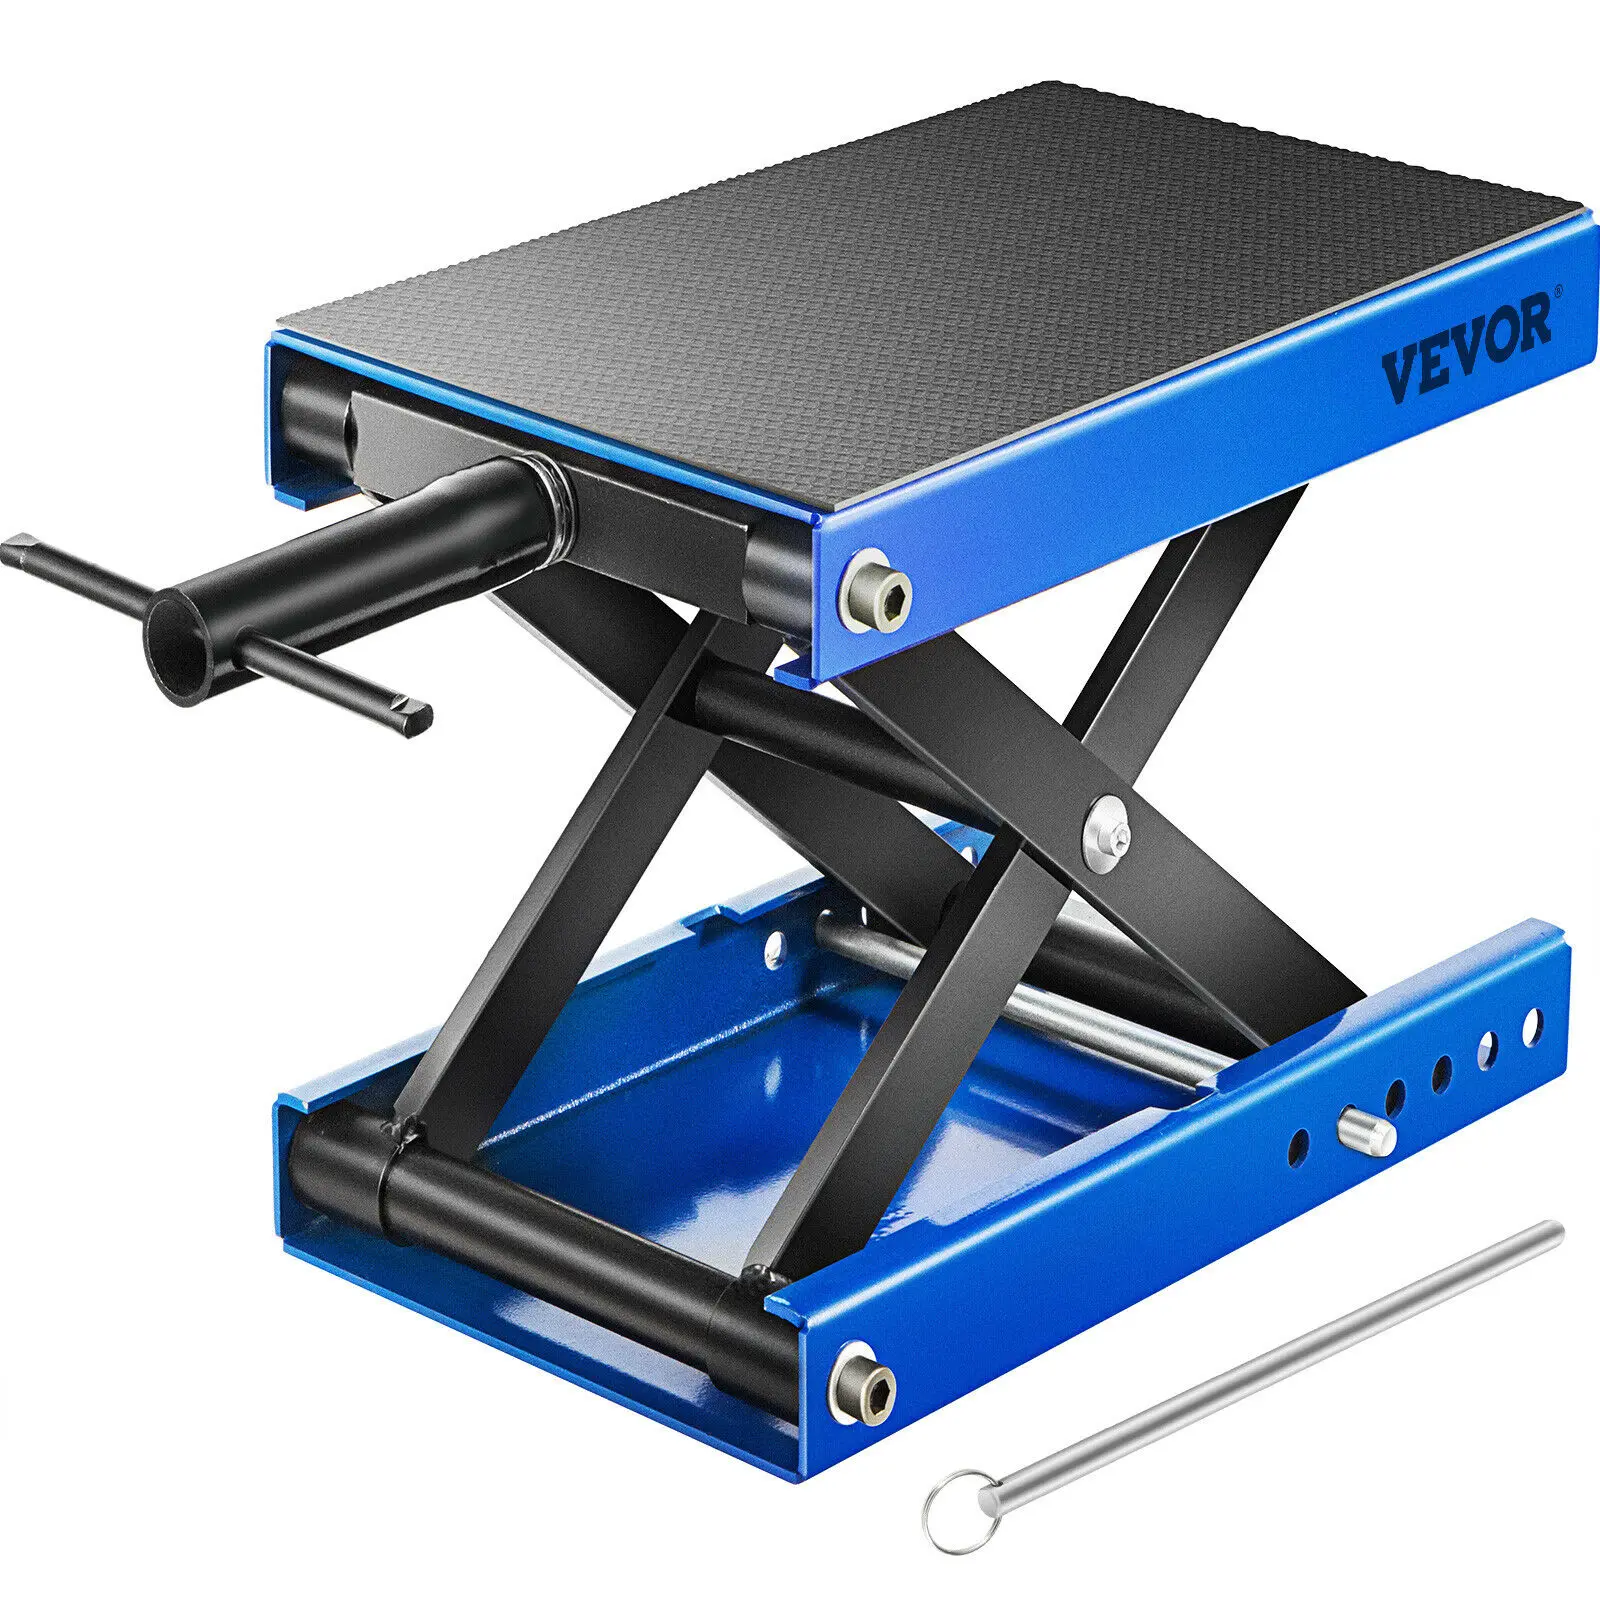 Motorcycle Scissor Lift Jack with Wide Deck Compact Crank Hoist Stand,Scissor Stand for Motorcycles 498.95 kg VEVOR Motorcycle Jack 1100 lb Motorcycle Lift Table with Non-Skid Rubber Pad 